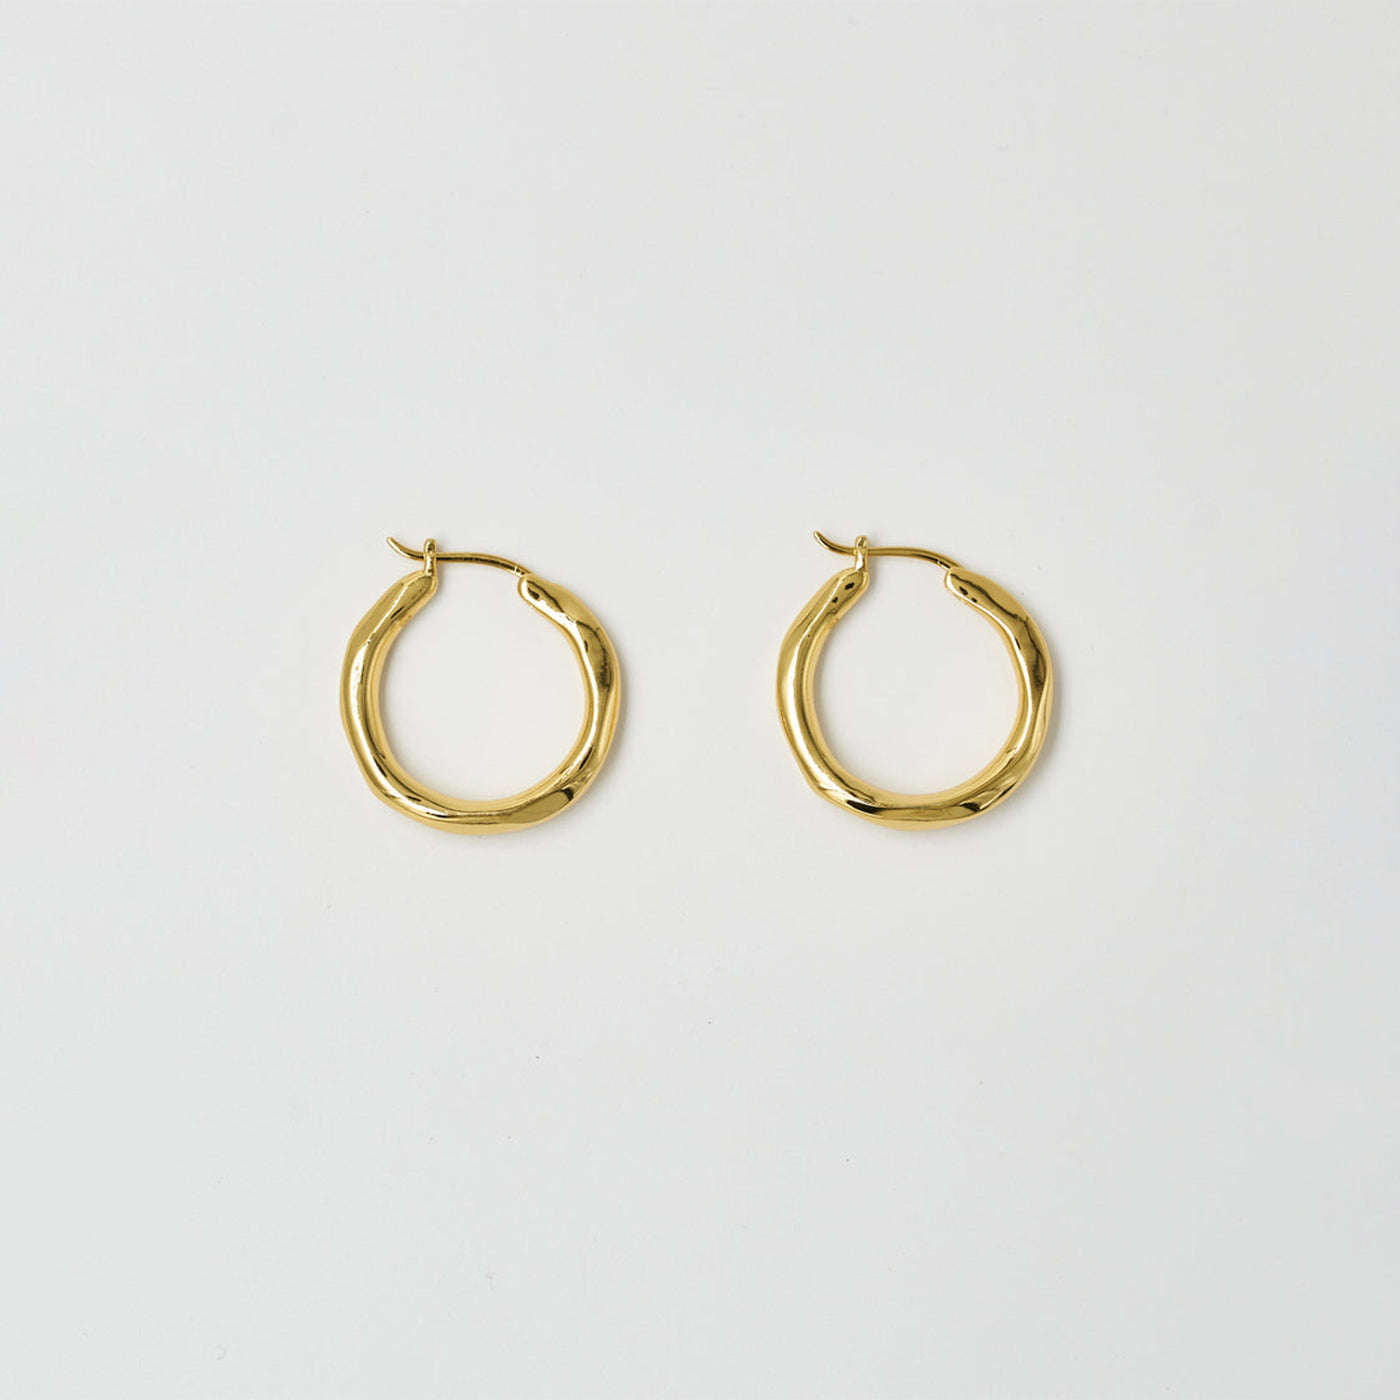 Brie Leon - Organica Small Hoops - Gold Plated